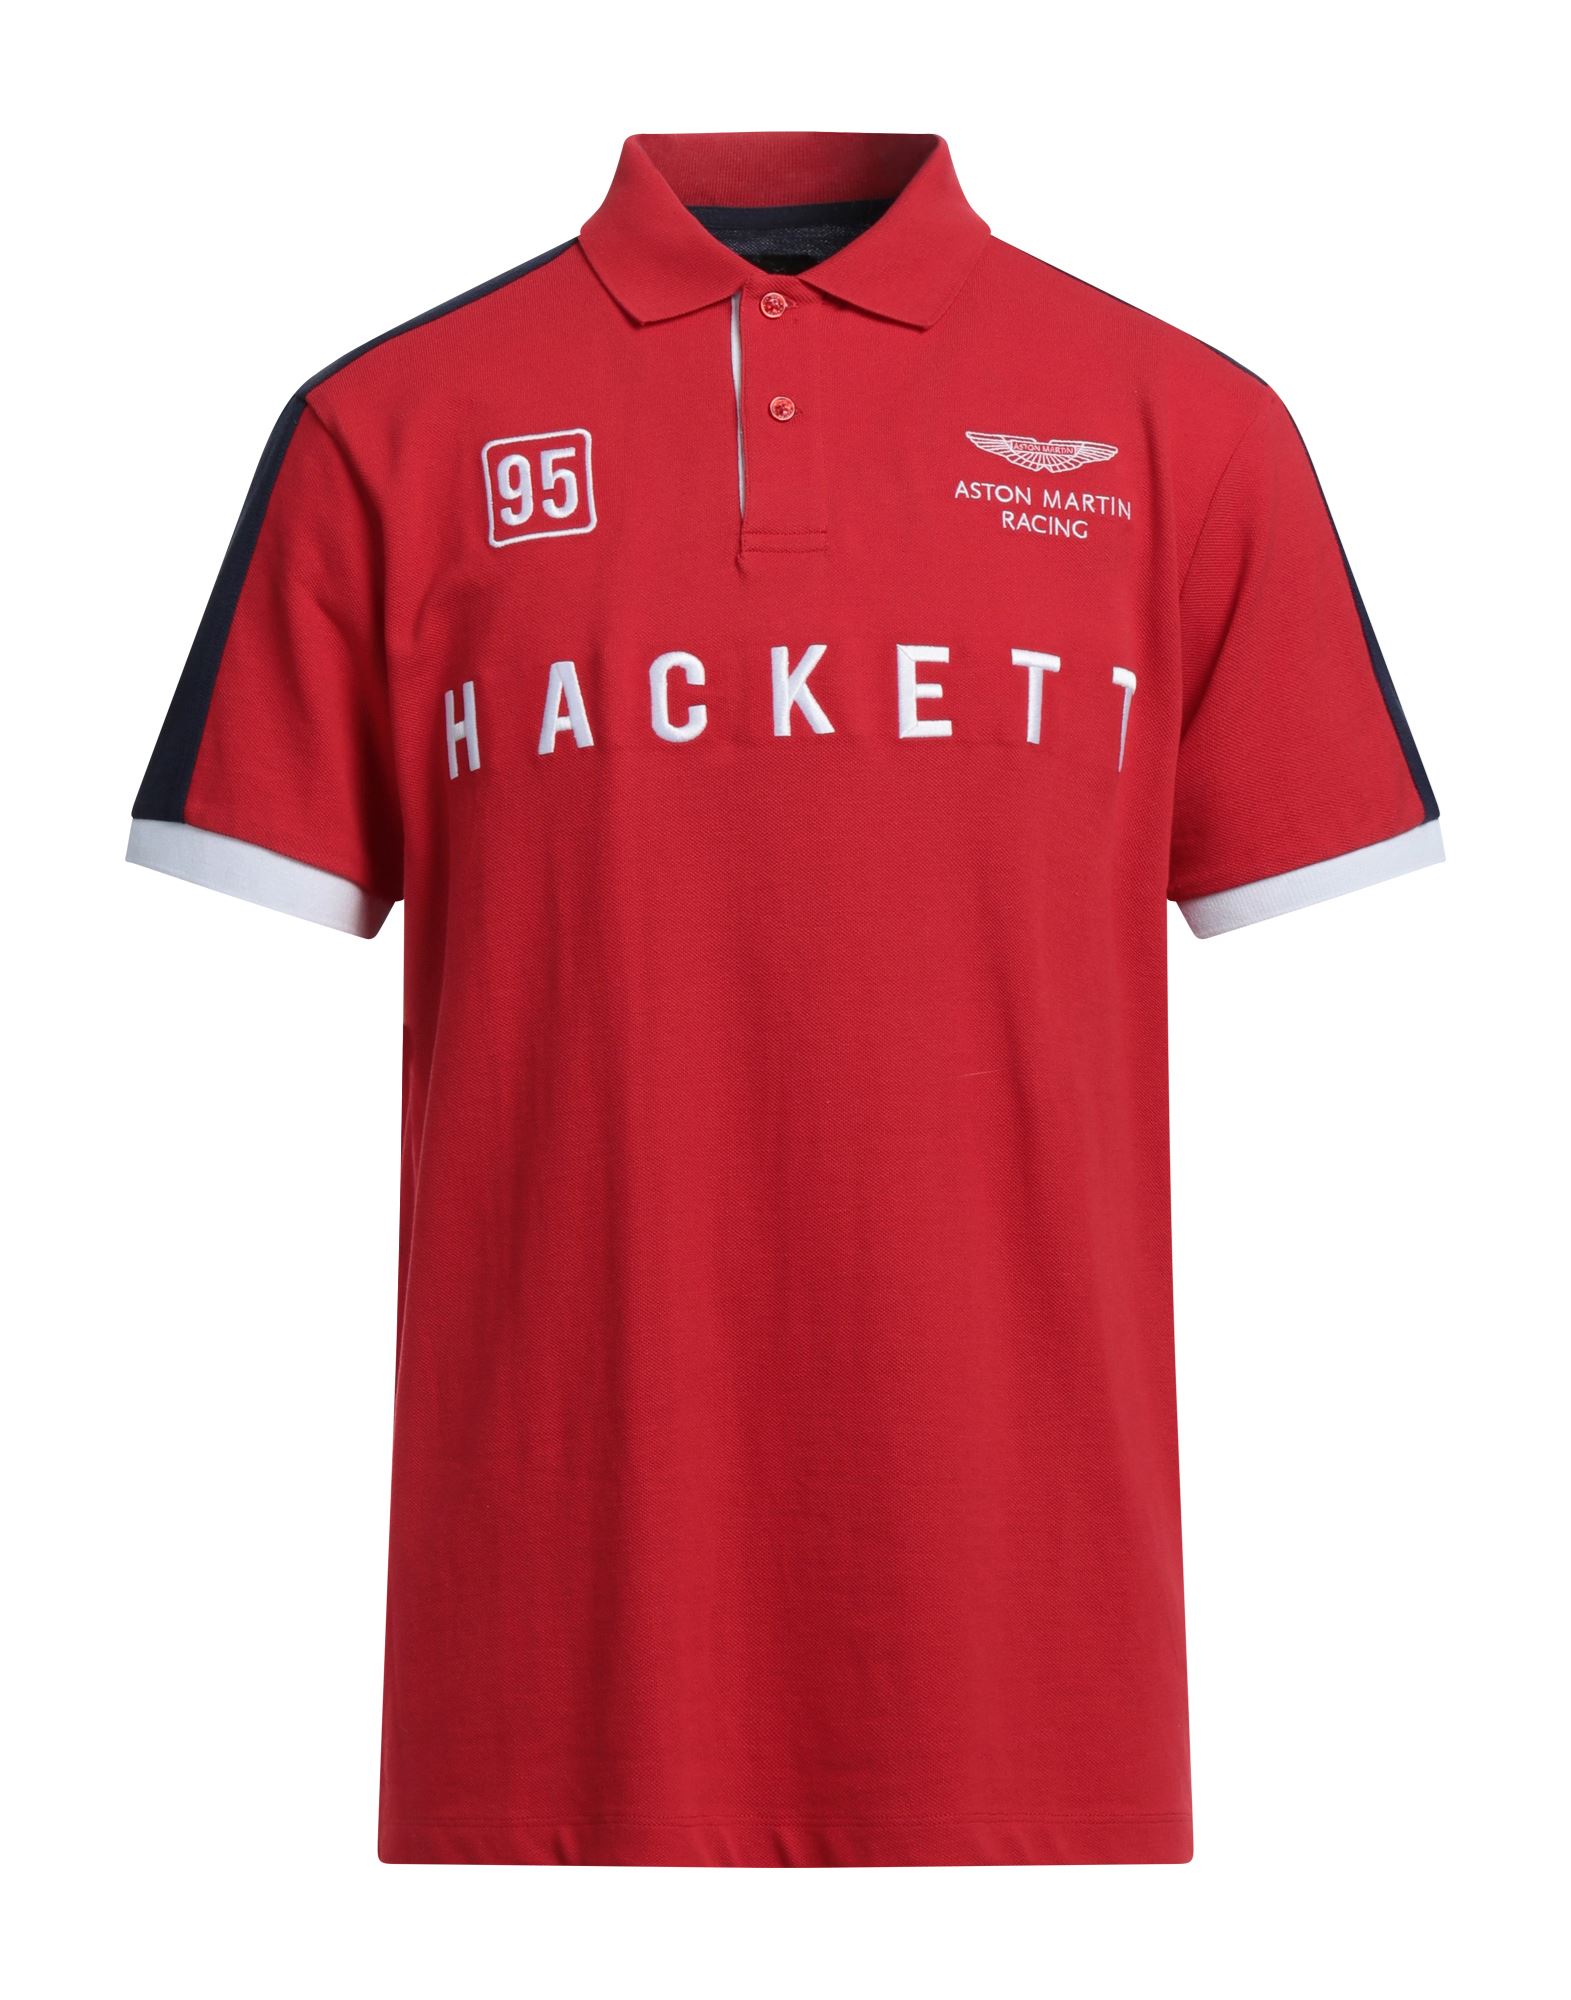 Aston Martin Racing By Hackett Polo Shirts In Red